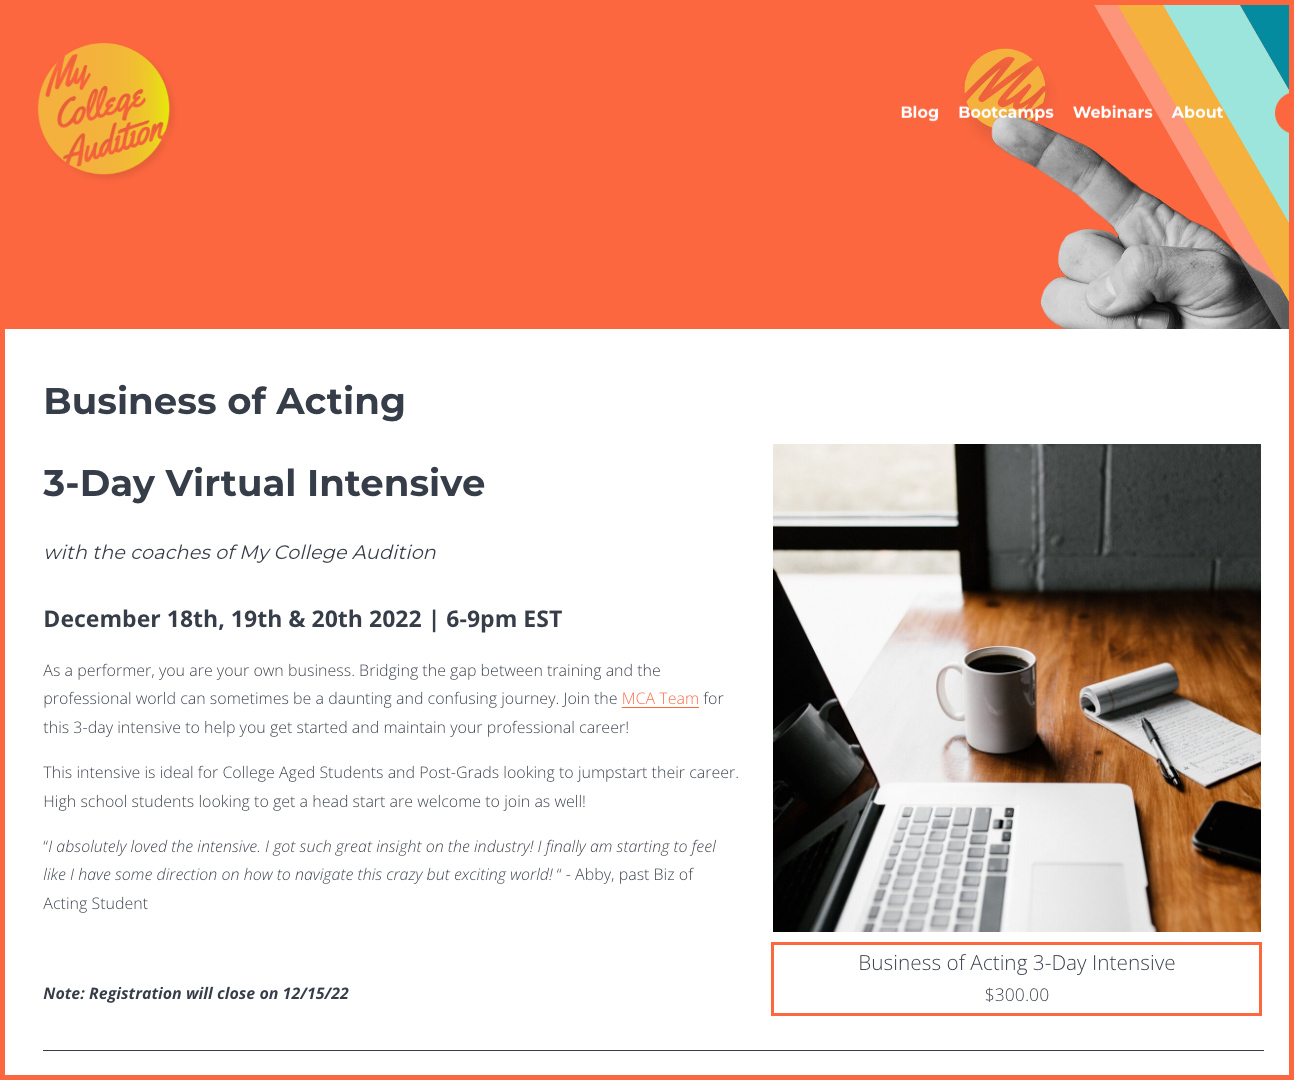 The business of acting -- a 3-day virtual intensive course from mycollegeaudition.com